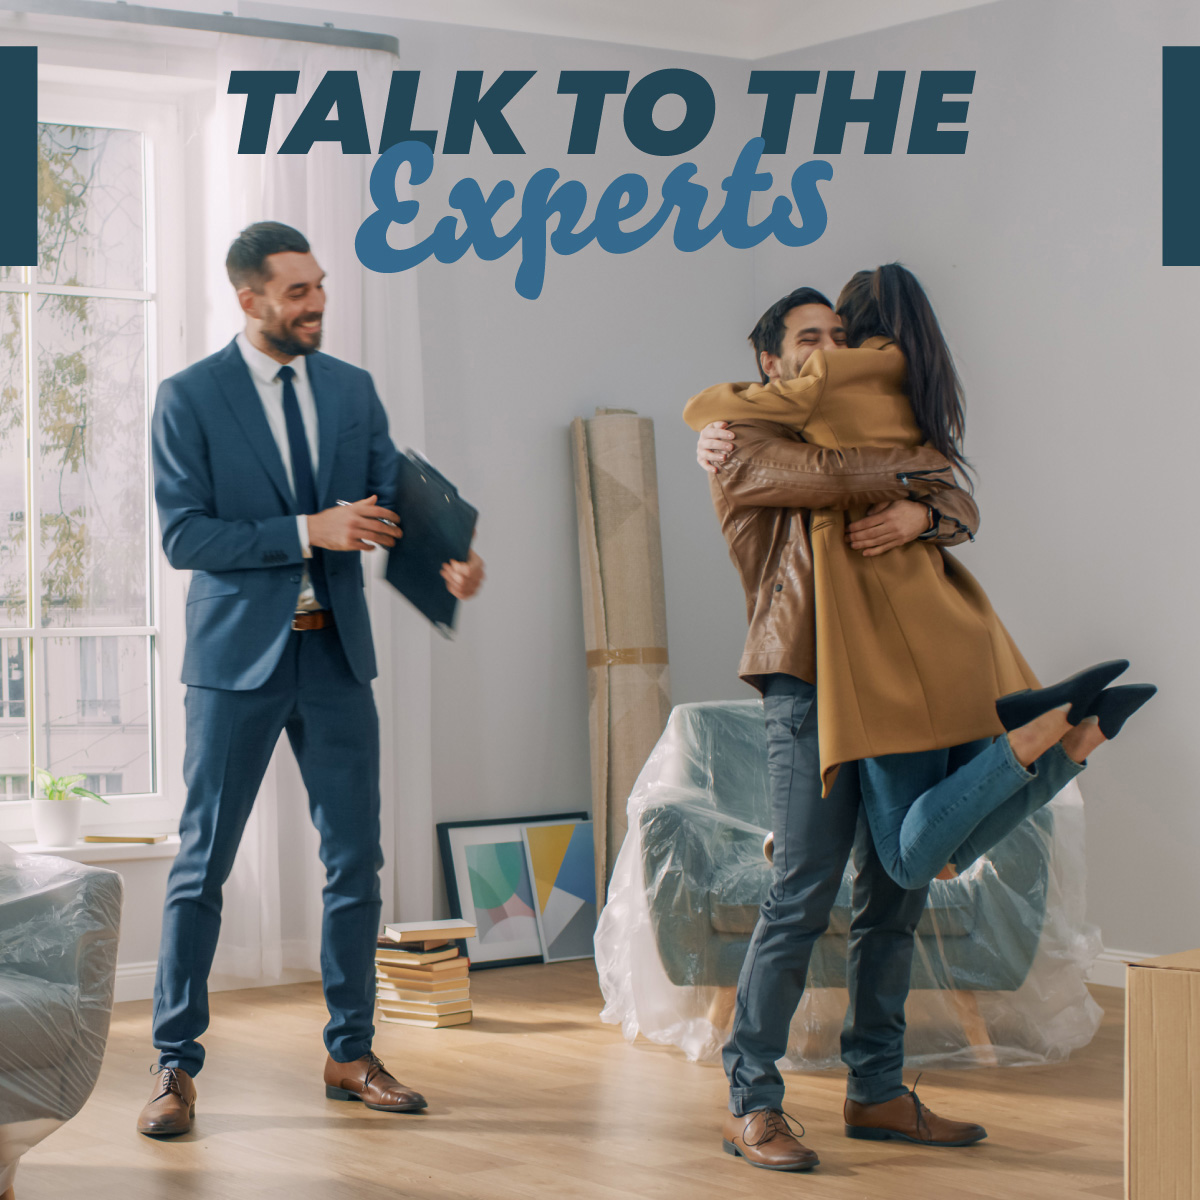 Need help buying a home? We've got you covered! Our experienced mortgage experts will make the process fun and stress-free. Don't miss out on your dream home, let us help you today! #HomeBuyingMadeEasy #MortgageExperts